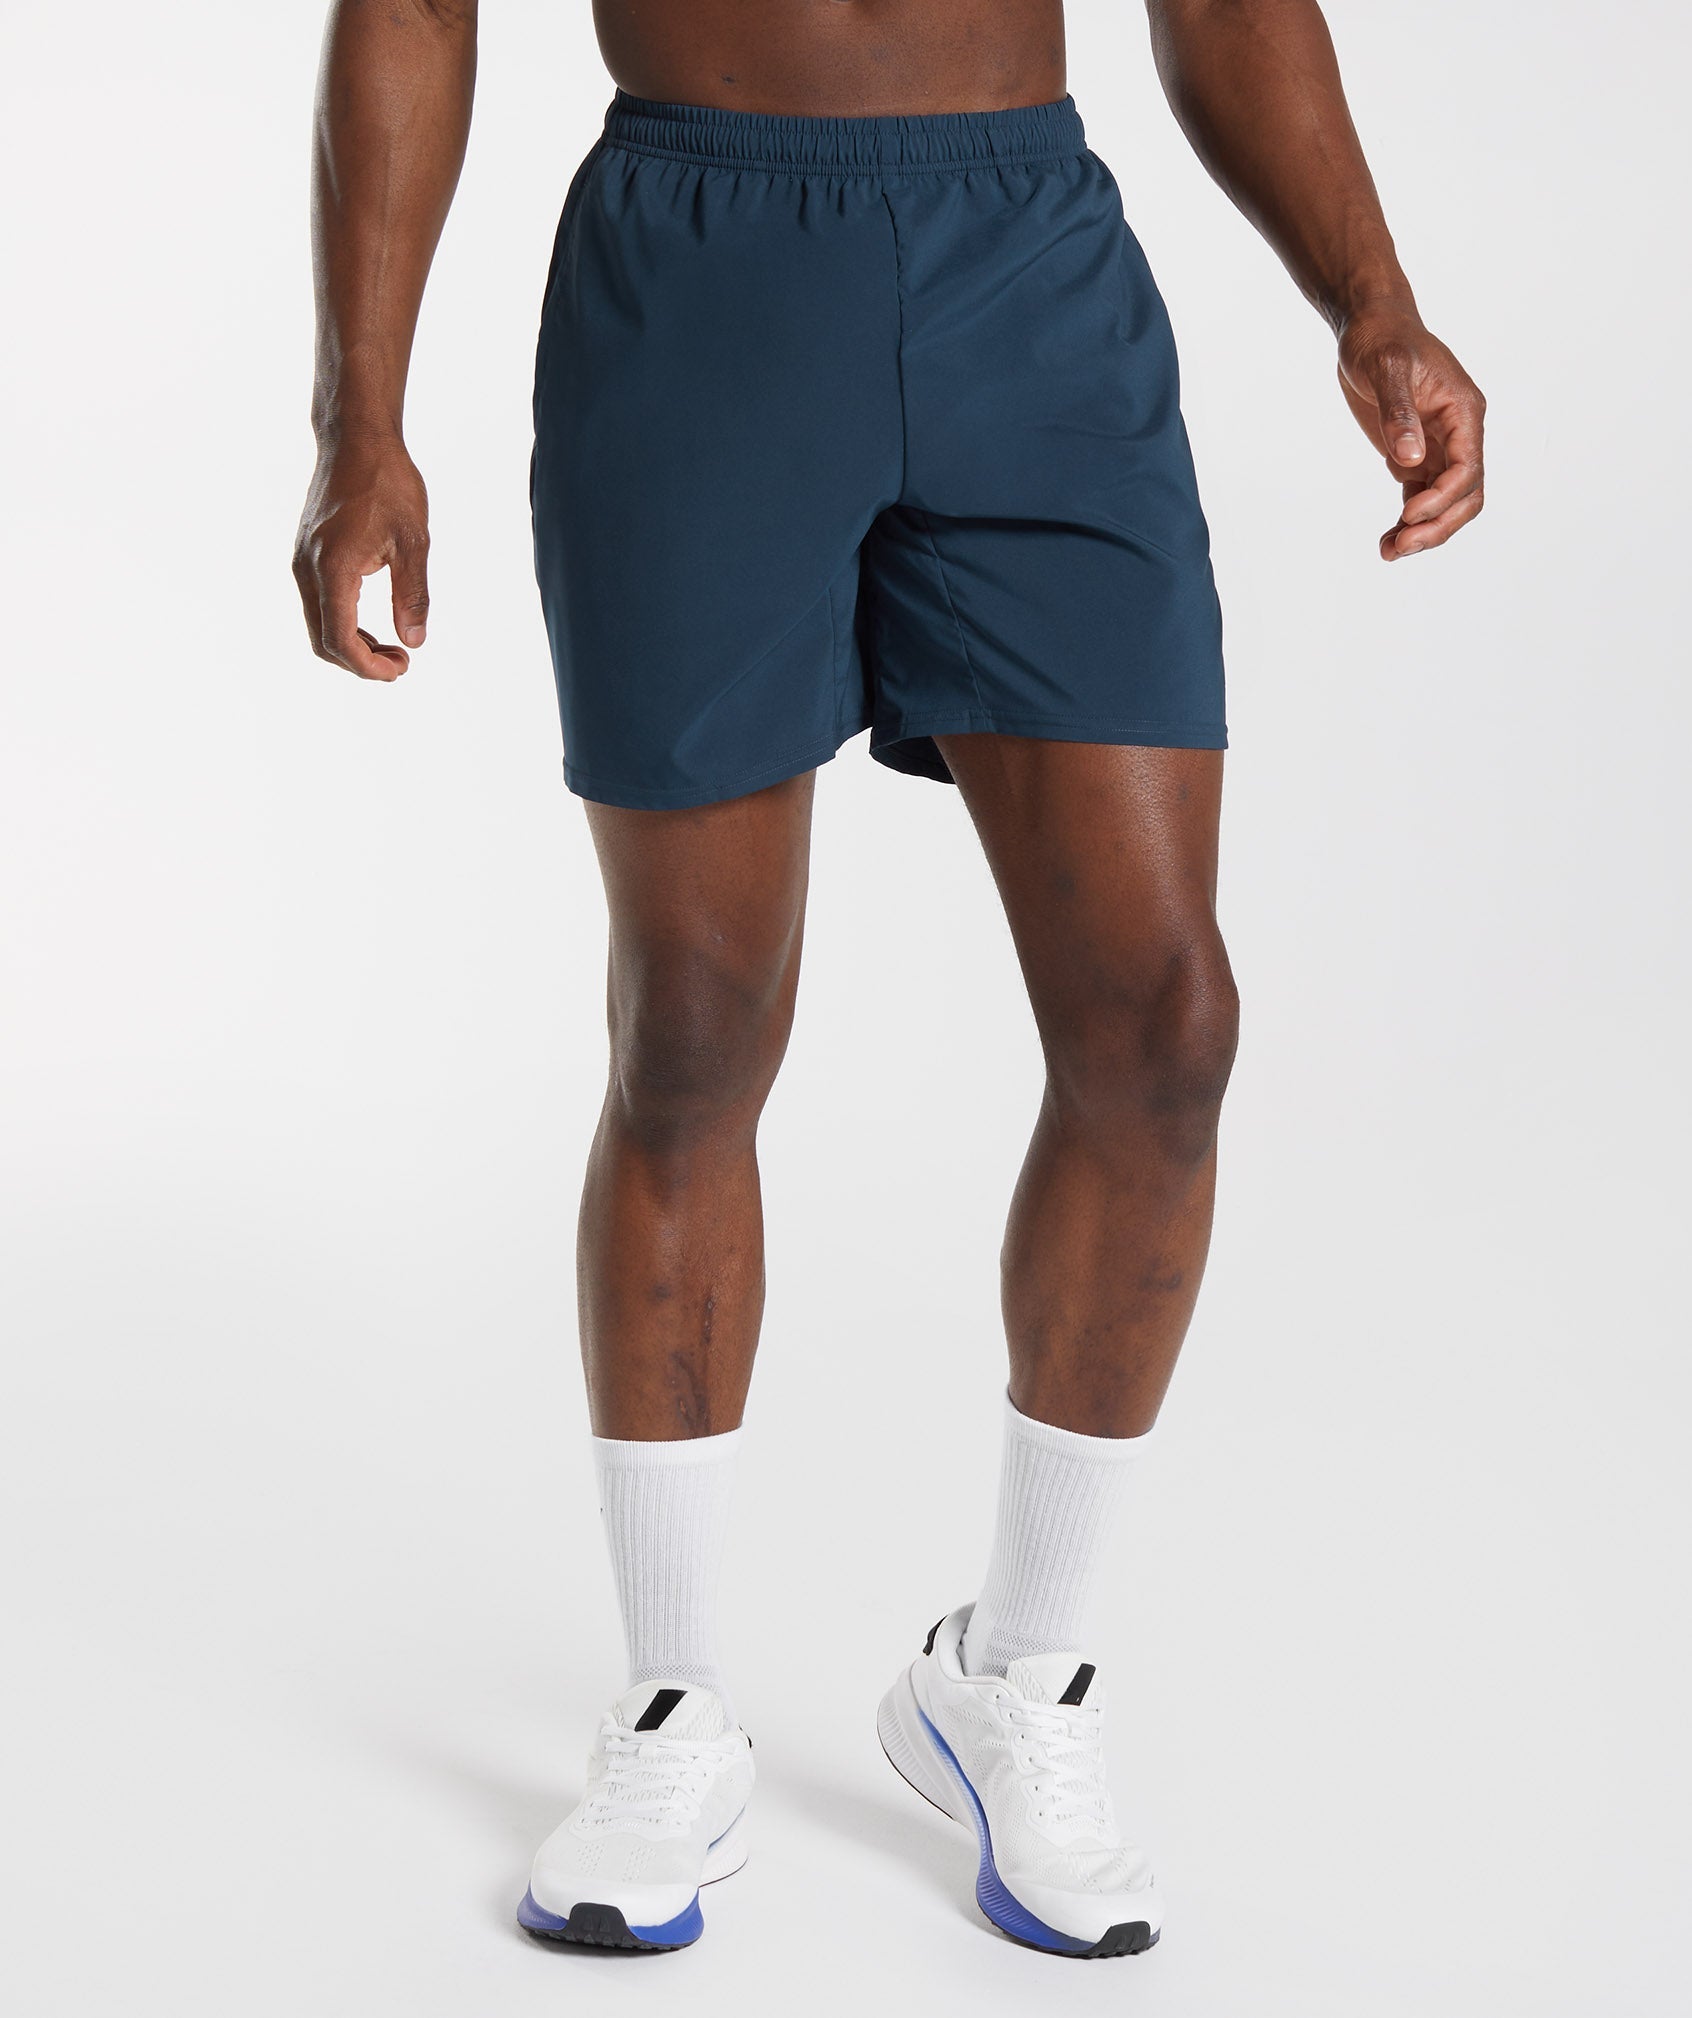 Men's New Arrivals - Fitted Fit Shorts